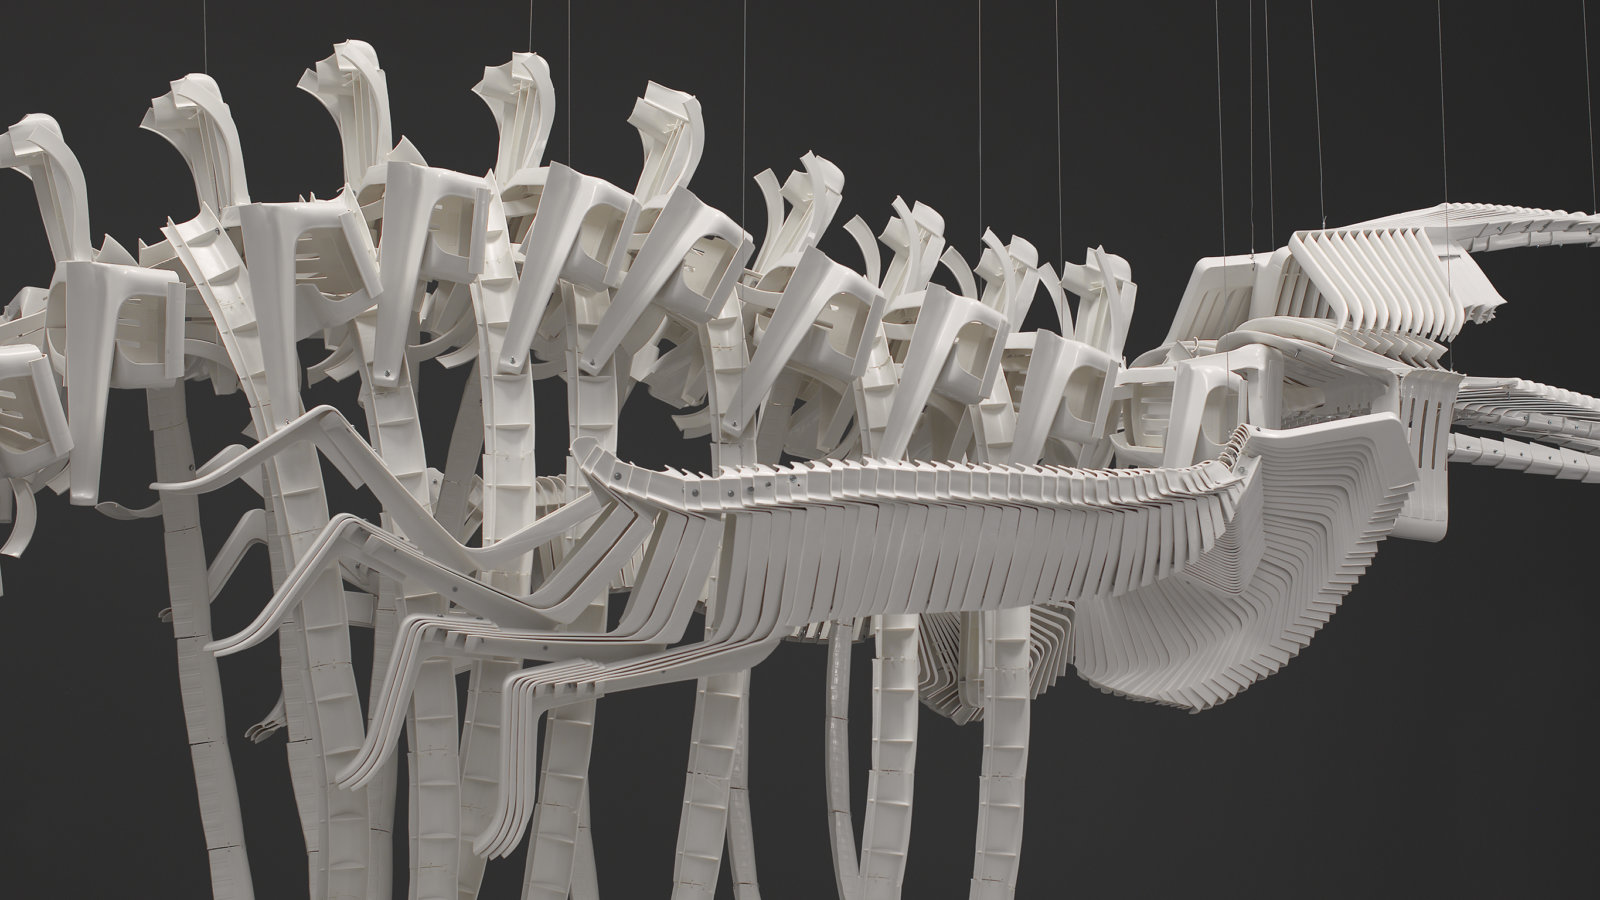 Brian Jungen, Cetology (detail), 2002, plastic chairs, 159 x 166 x 587 in. (404 x 422 x 1491 cm)